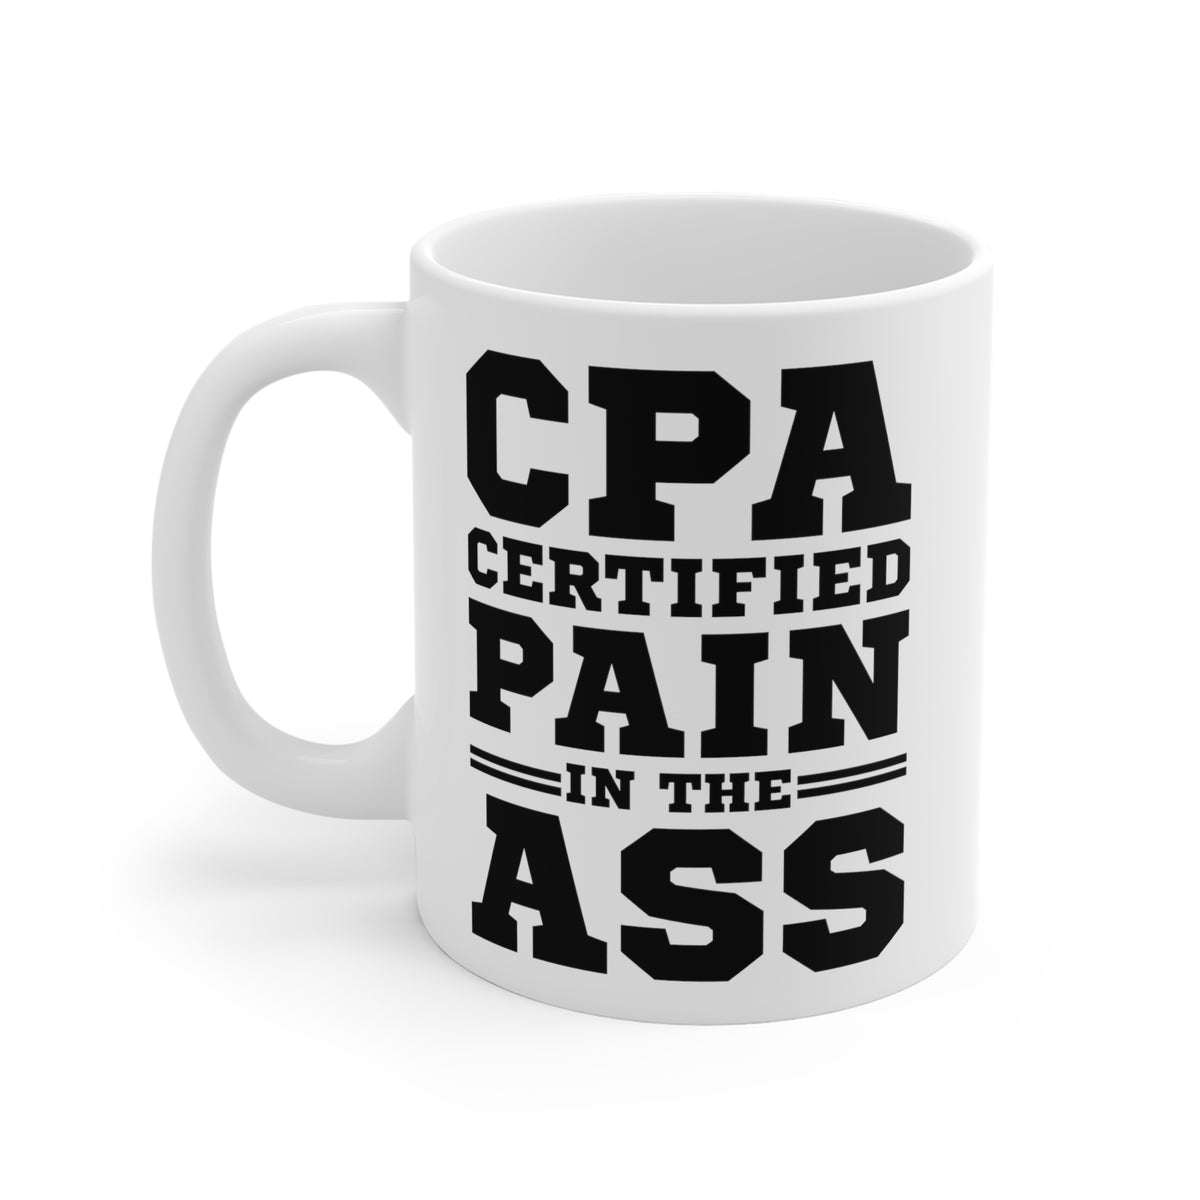 CPA. Certified Pain In The Ass Coffee Mug - 11oz Mug - Funny Gift For Accountant - Canada